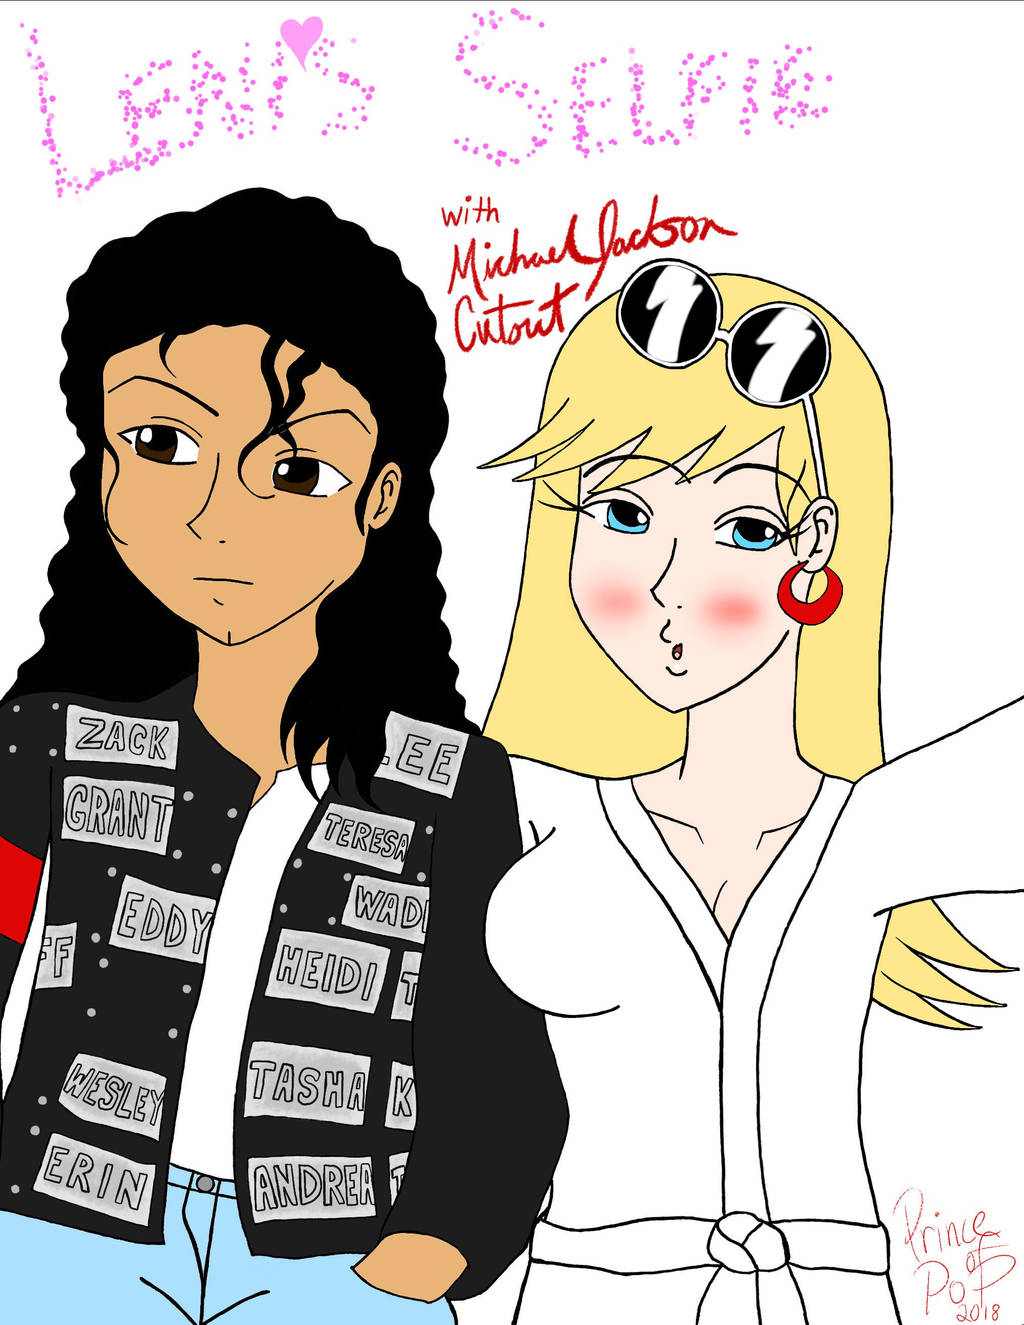 leni_s_selfie_with_michael_jackson_cutout_by_prince_of_pop_dcryxzt-fullview.jpg